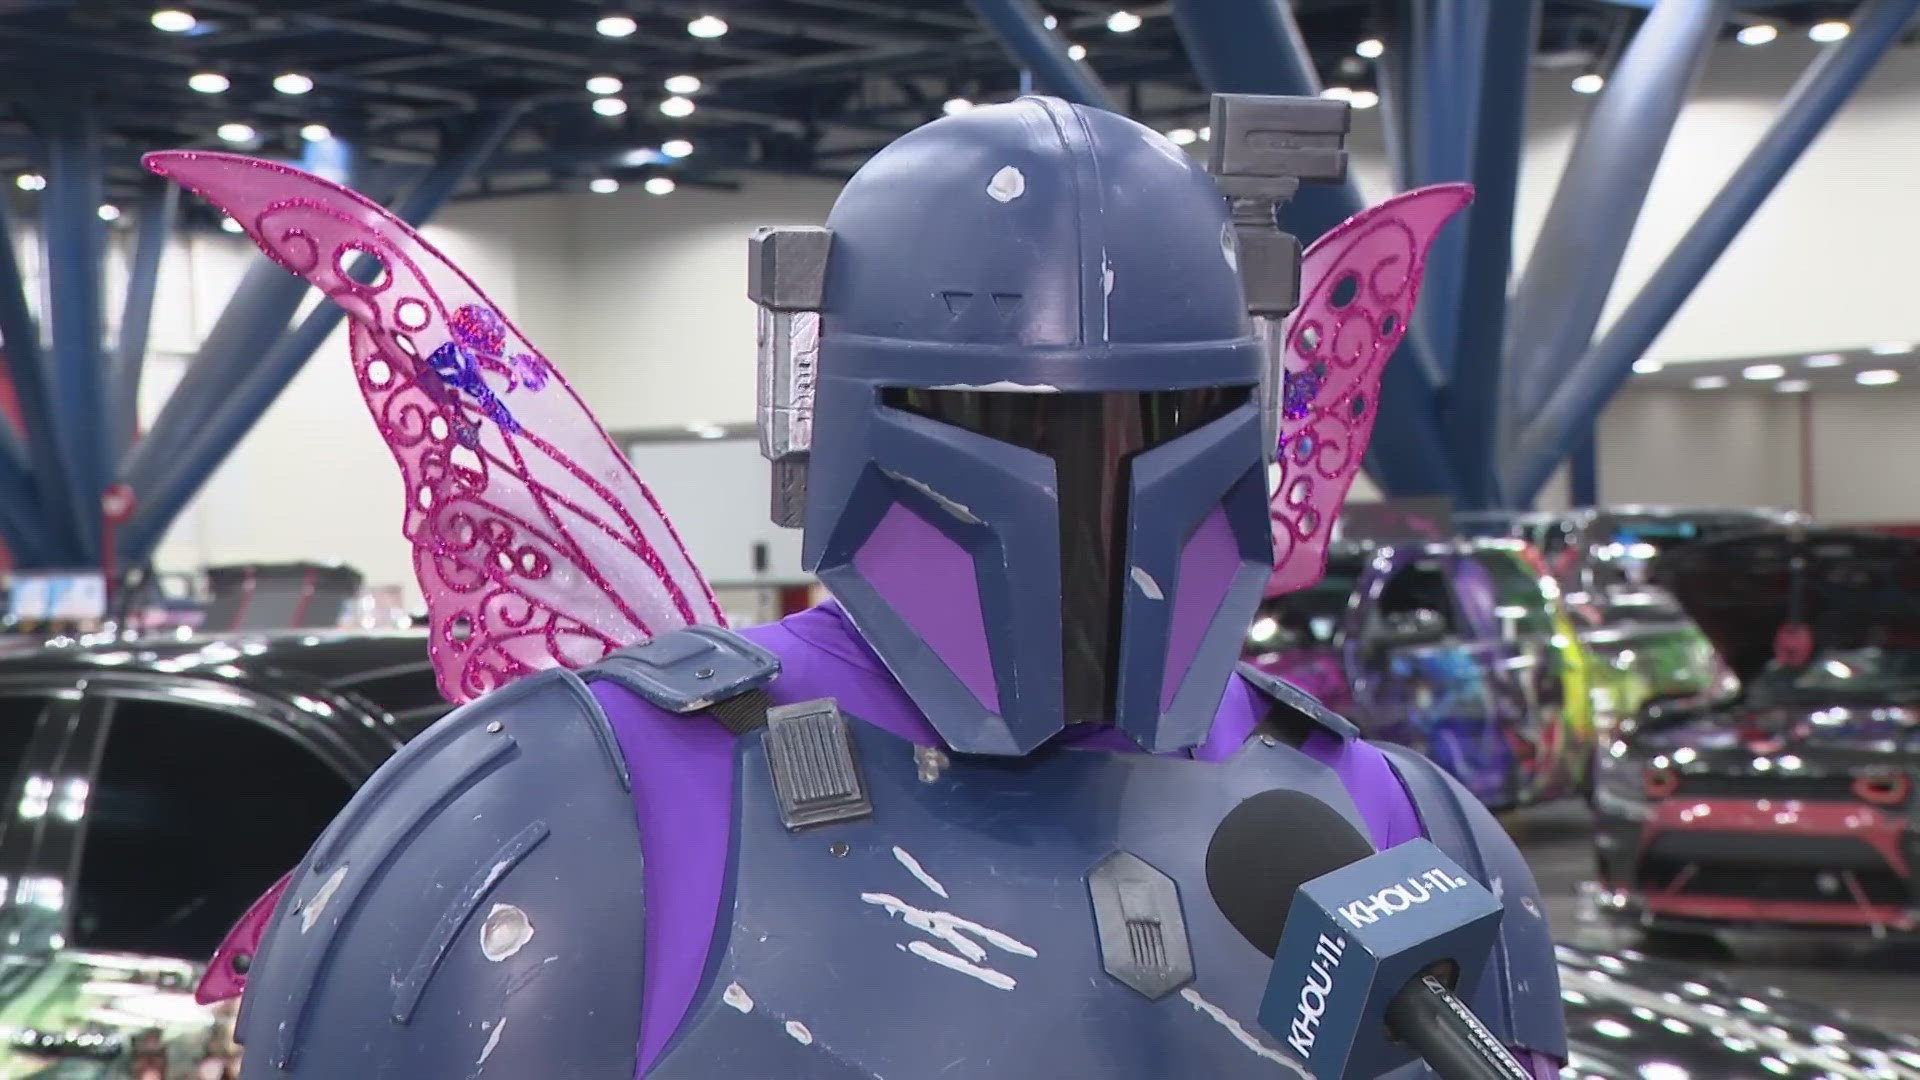 Get ready for an epic weekend of entertainment as Comicpalooza returns to downtown Houston for the largest pop culture convention in the Lone Star State.